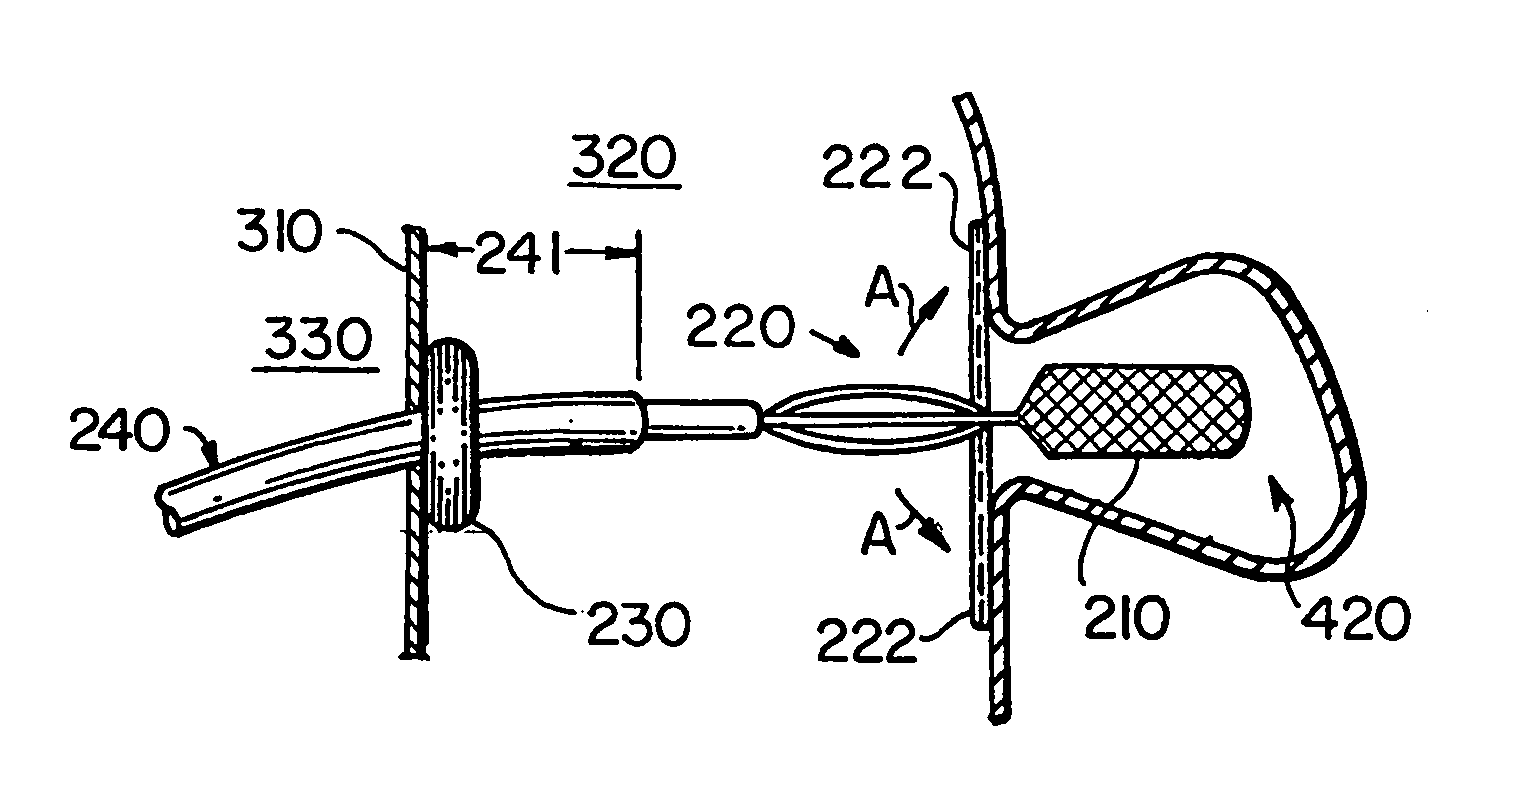 Apparatus for implanting devices in atrial appendages